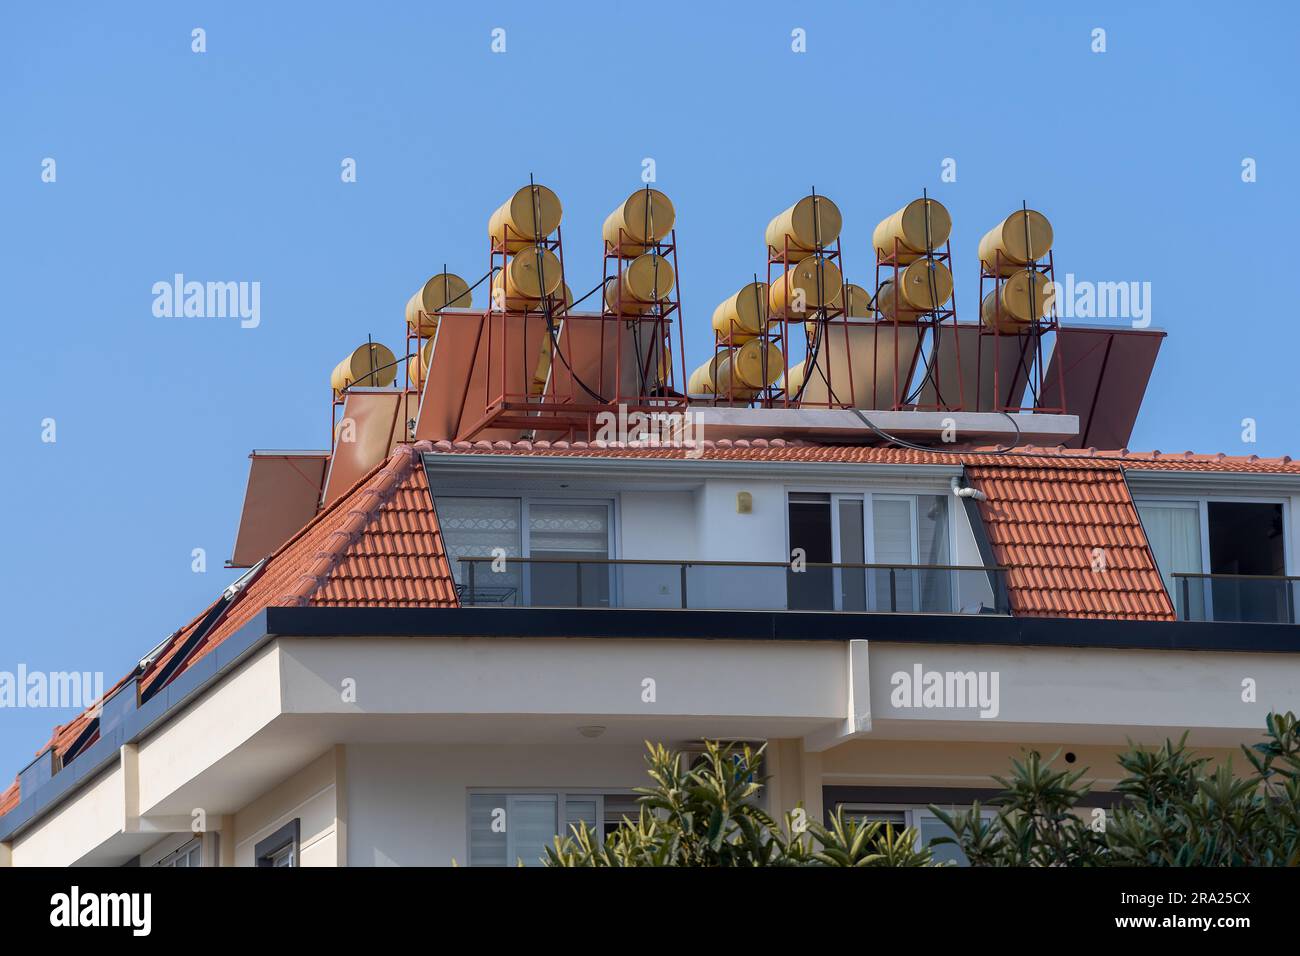 New residential building with solar water heaters on the roof. Urban architecture. Stock Photo